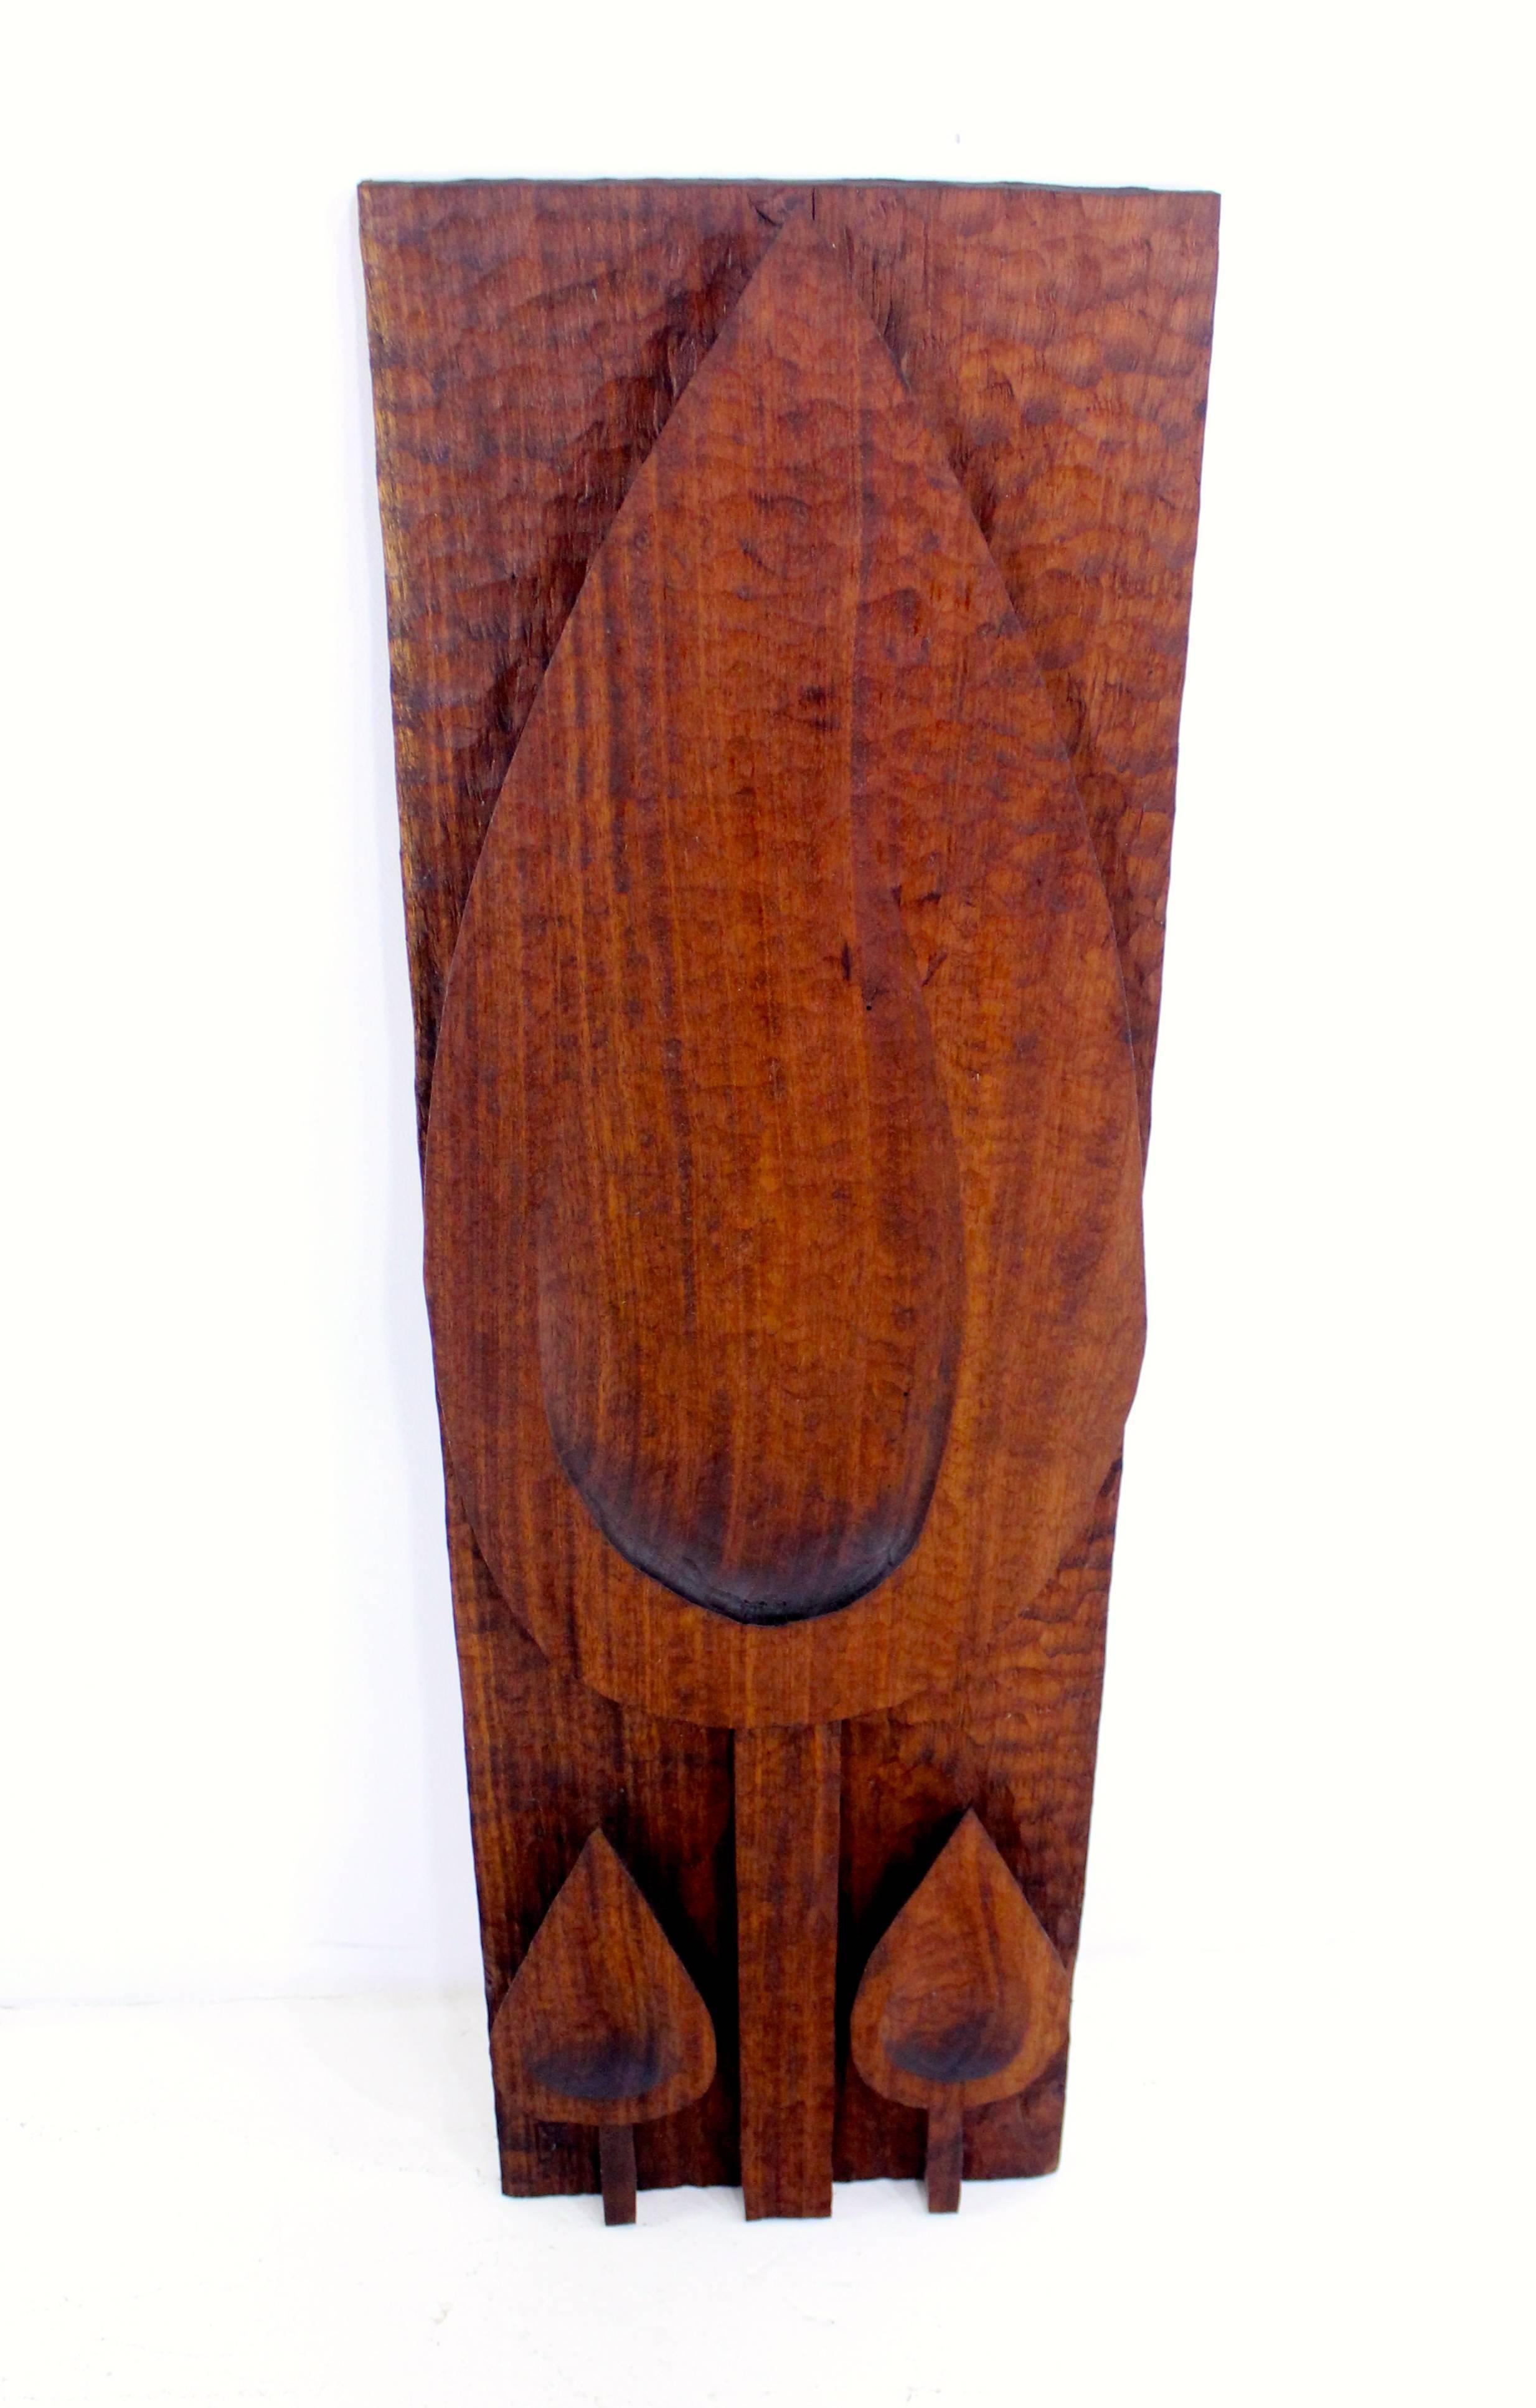 Mid-Century wood carving by Leroy Setziol, 1915-2005.

A composer in wood, Leroy Setziol created lyrical sculpture that honors the beauty of a material strongly identified with the Northwest. The black walnut, teak, fir, and other woods he